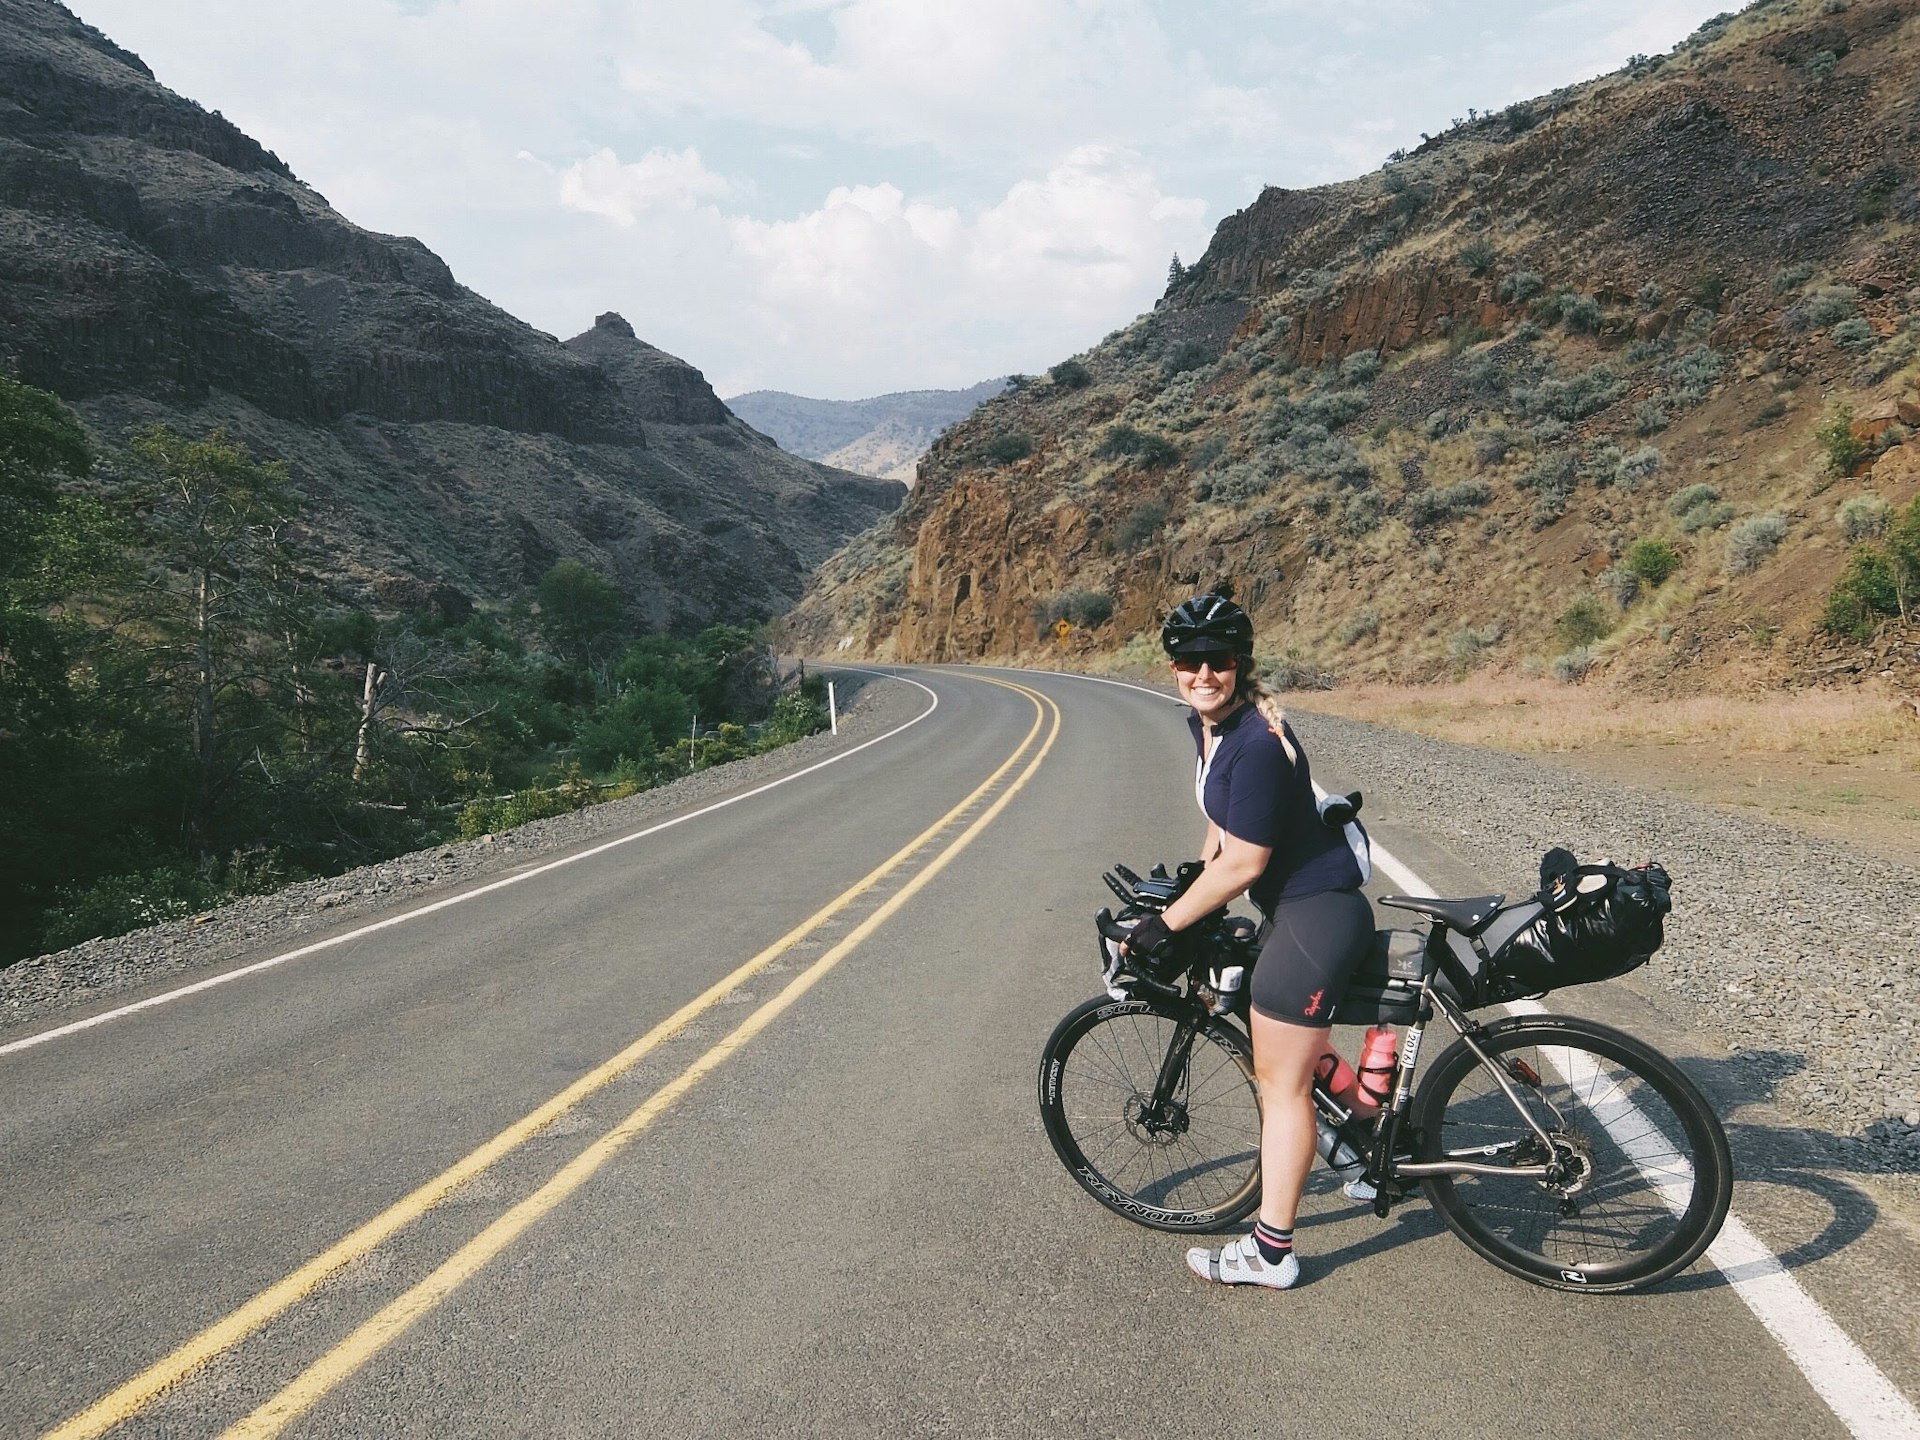 The female cyclist who rode 2,000 miles across America alone with a broken shoulder